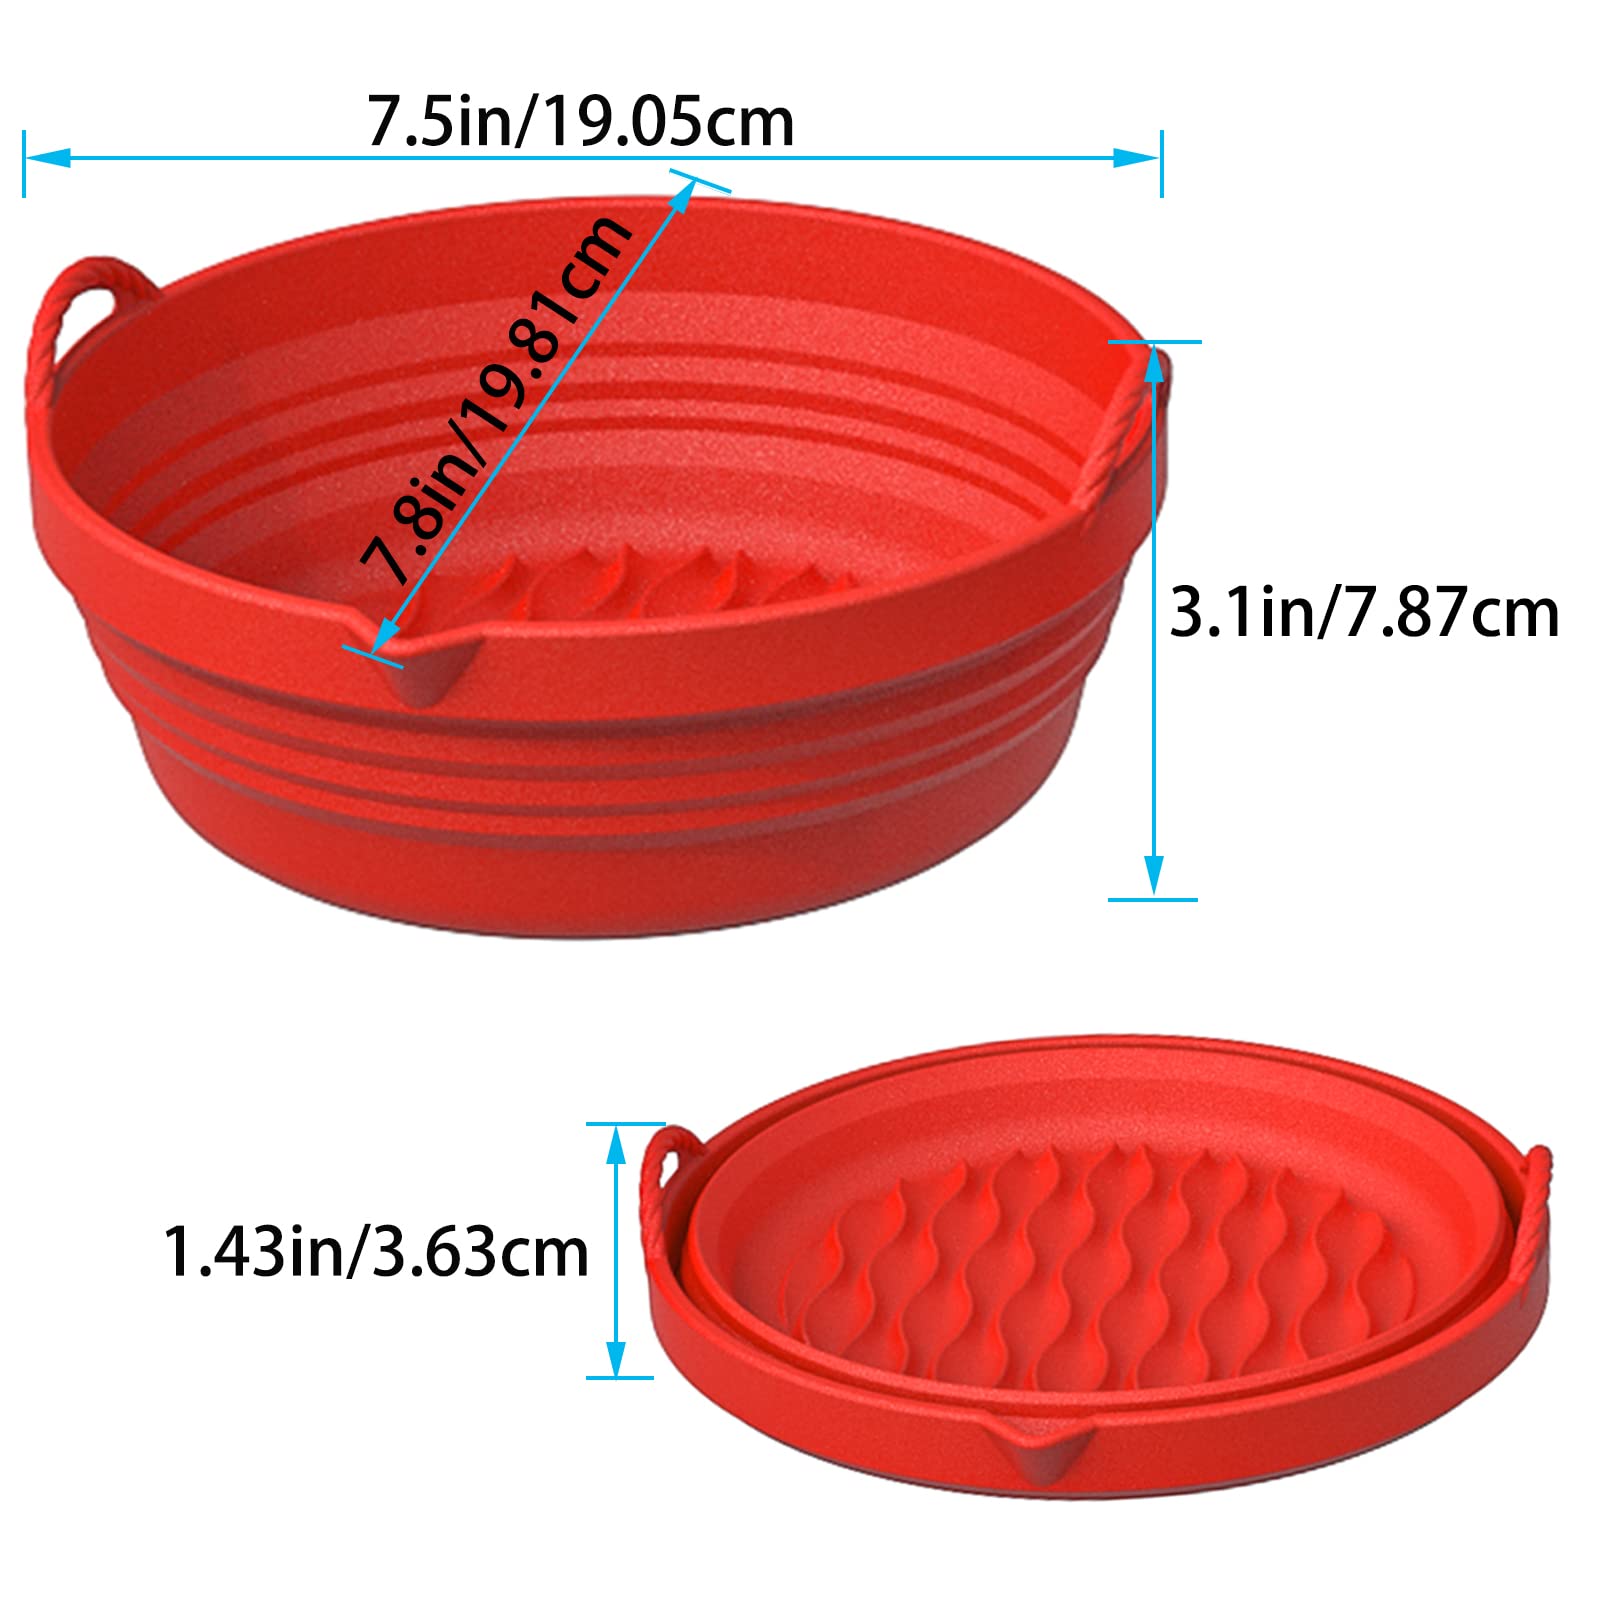 2-Pack Silicone Air Fryer Liners, 7.5" Foldable Reuse Silicone Air Fryer Basket, Easy to Clean Silicone Tray Air Fryer, Deep Fryer Liner, Use Instead of Parchment Fits 3 to 5 QT Air Fryer (Red & Blue)